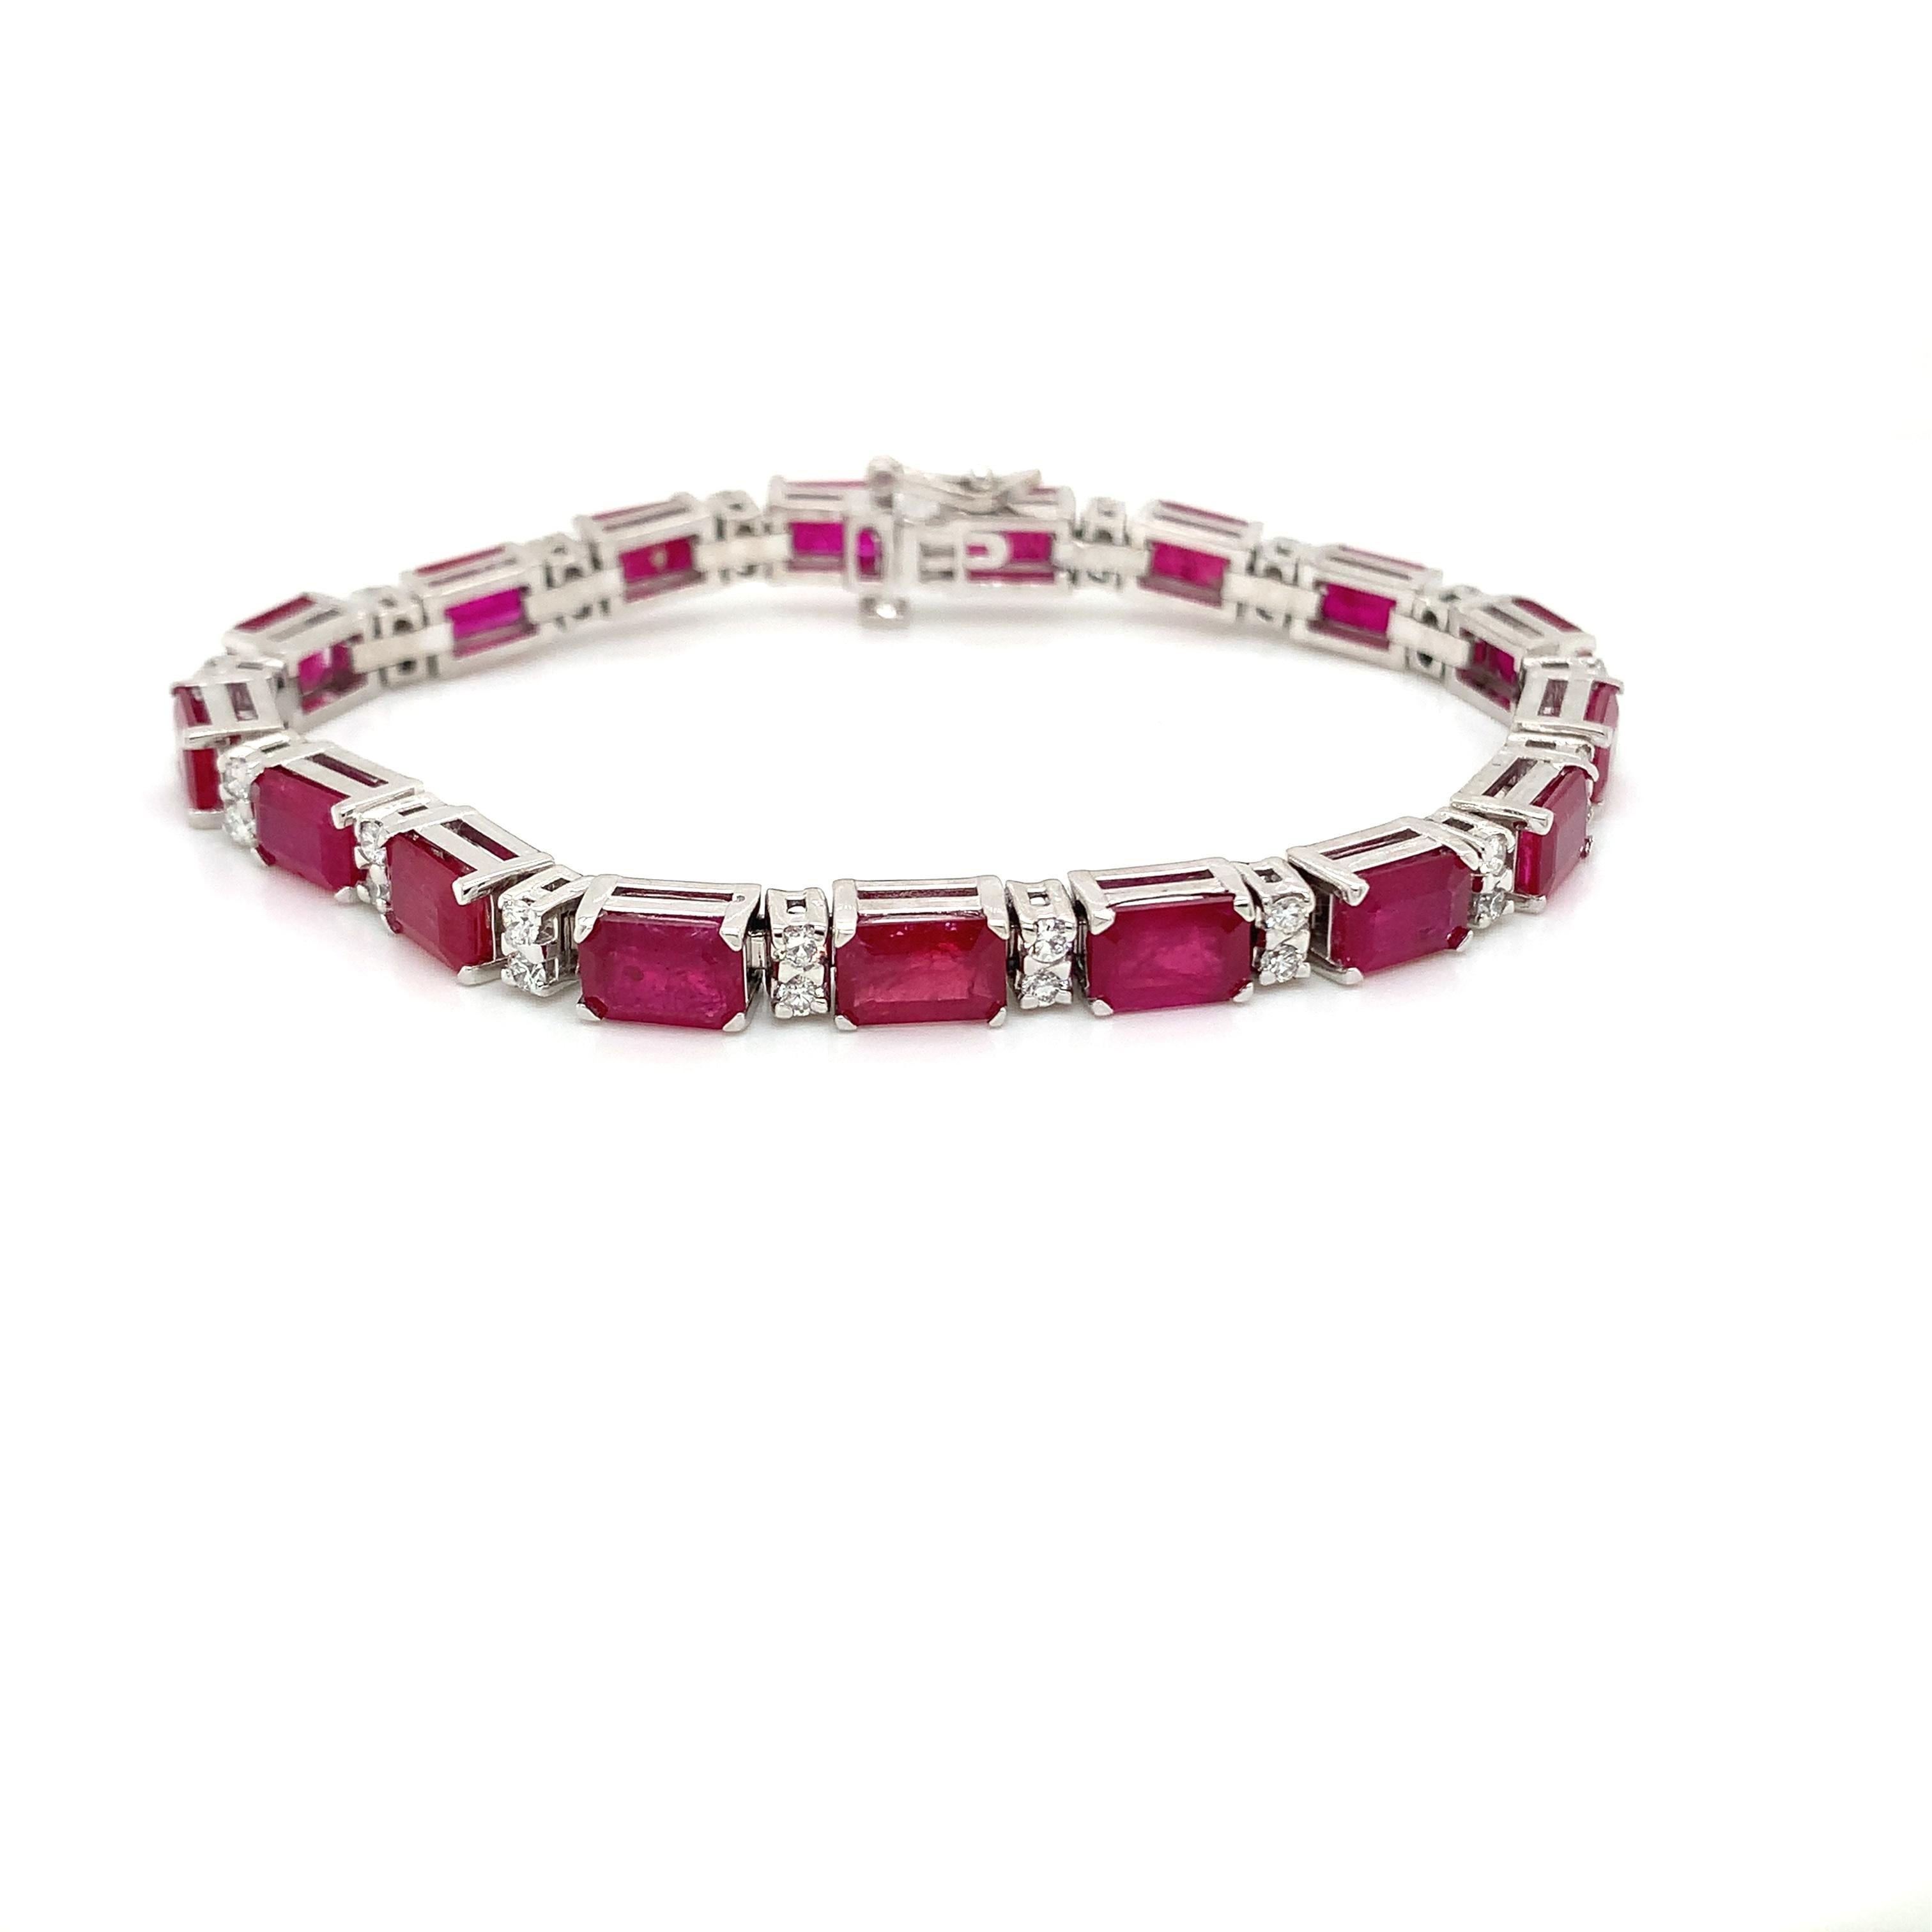 17 pieces of E/C rubies weighing 17.32 cts
Measuring (7.0x5.0) mm
32 pieces of diamonds weighing 1.12 cts
Set in 14k white gold bracelet
Bracelet Size: 7 inches.